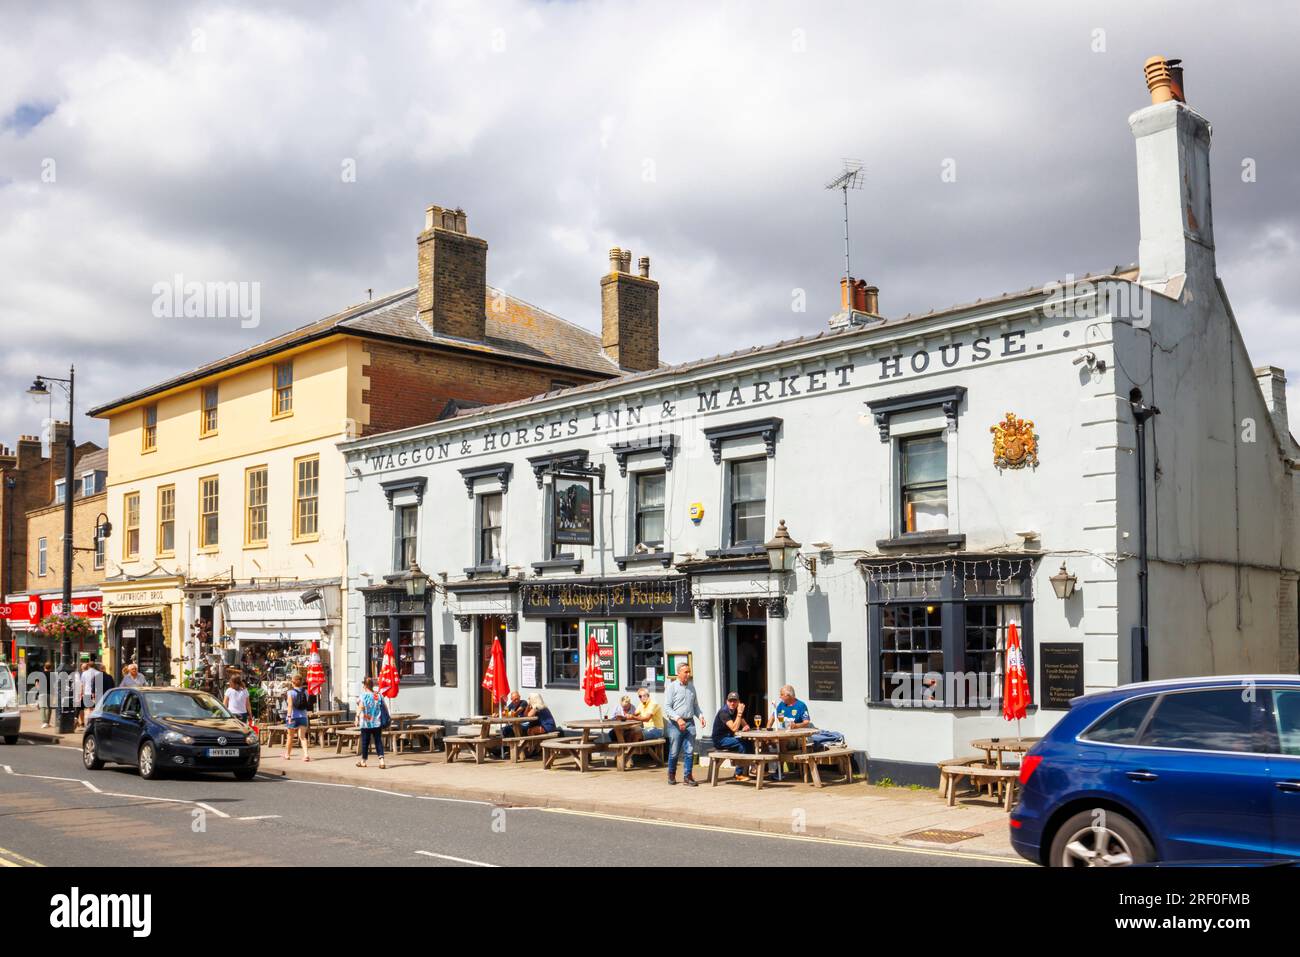 The Waggon & Horses Inn & Market House roadside pub in High Street, Newmarket, a market town in the West Suffolk district of Suffolk, east England Stock Photo